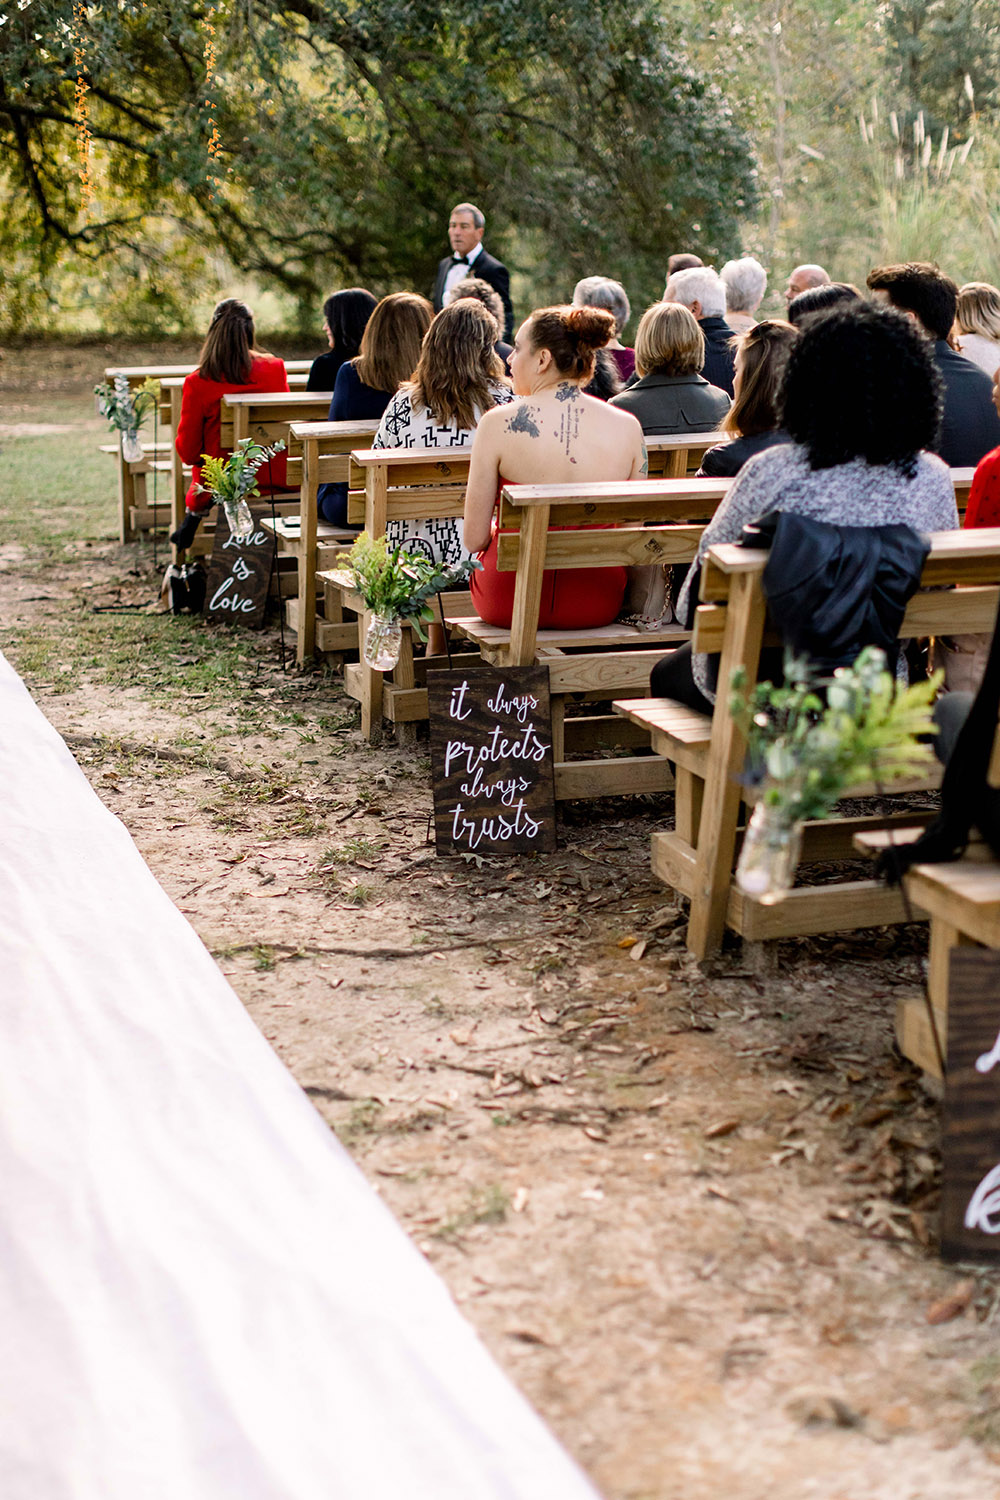 the wedding aisle lined with signs 1 Corinthians 13